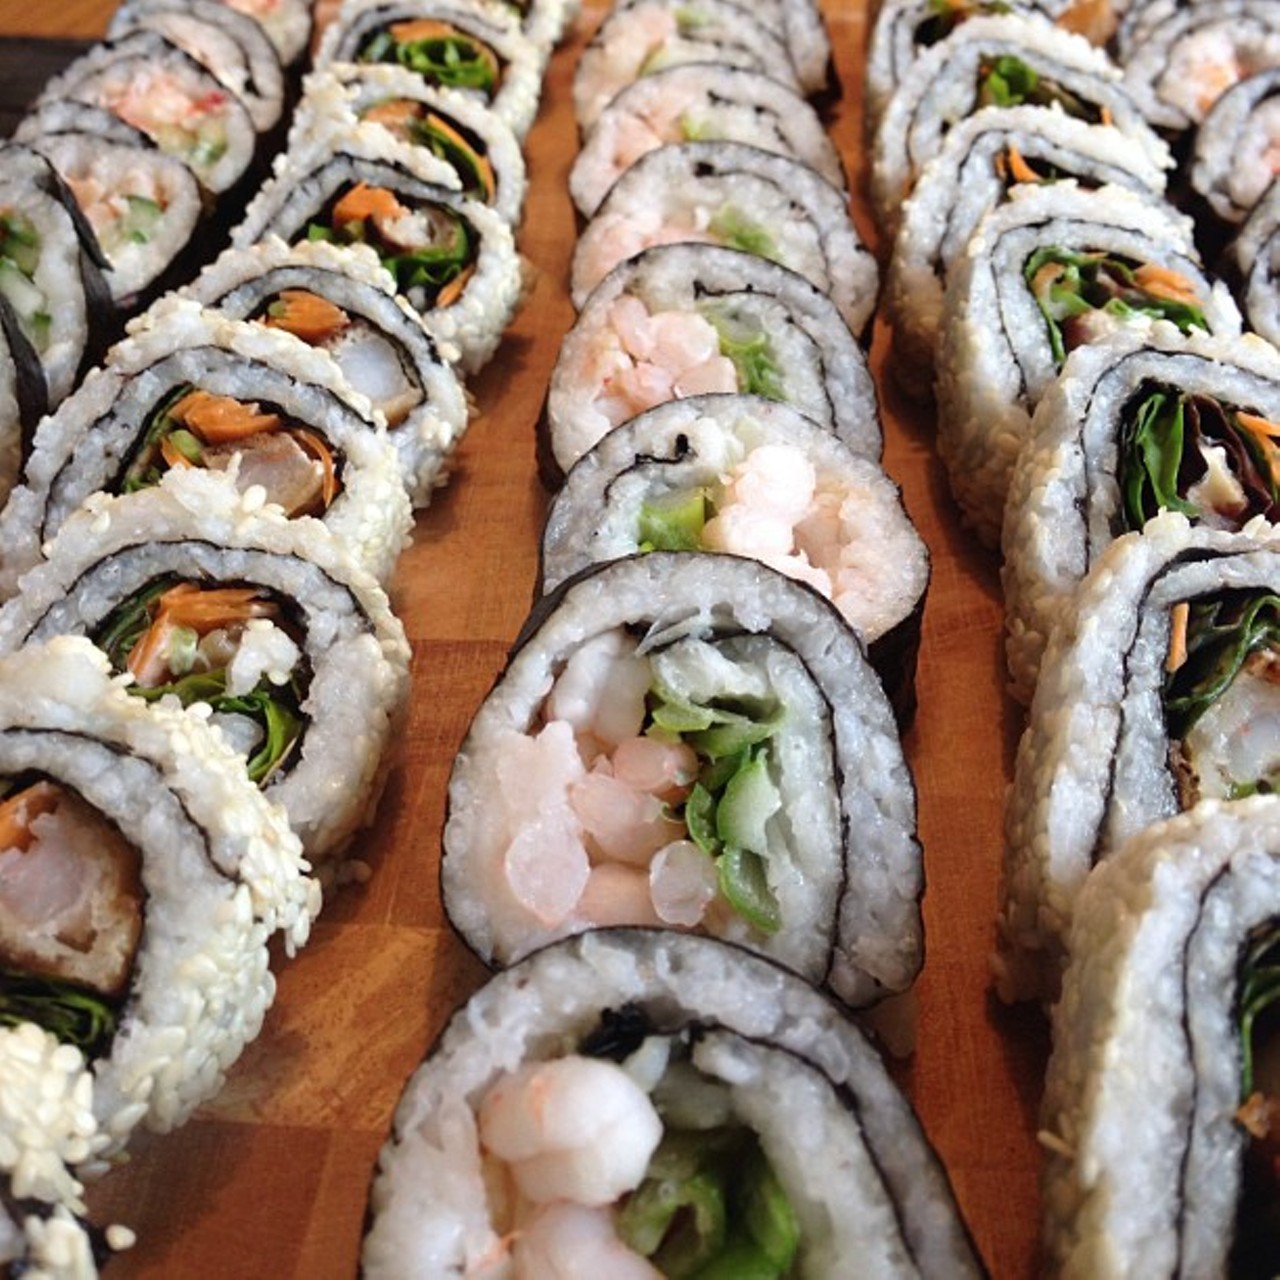 Not to be mistaken for the Tomo on east 9th, this Strongsville landmark is home to a Sunday all-you-can-eat sushi buffet. Starting at noon, Tomo offers over 35 varieties of sushi rolls. Tomo Hibachi & Sushi Bar is located at 15163 Pearl Rd, Strongsville. Call 440-878-0760 or visit tomosushisteakhouse.com for more information.